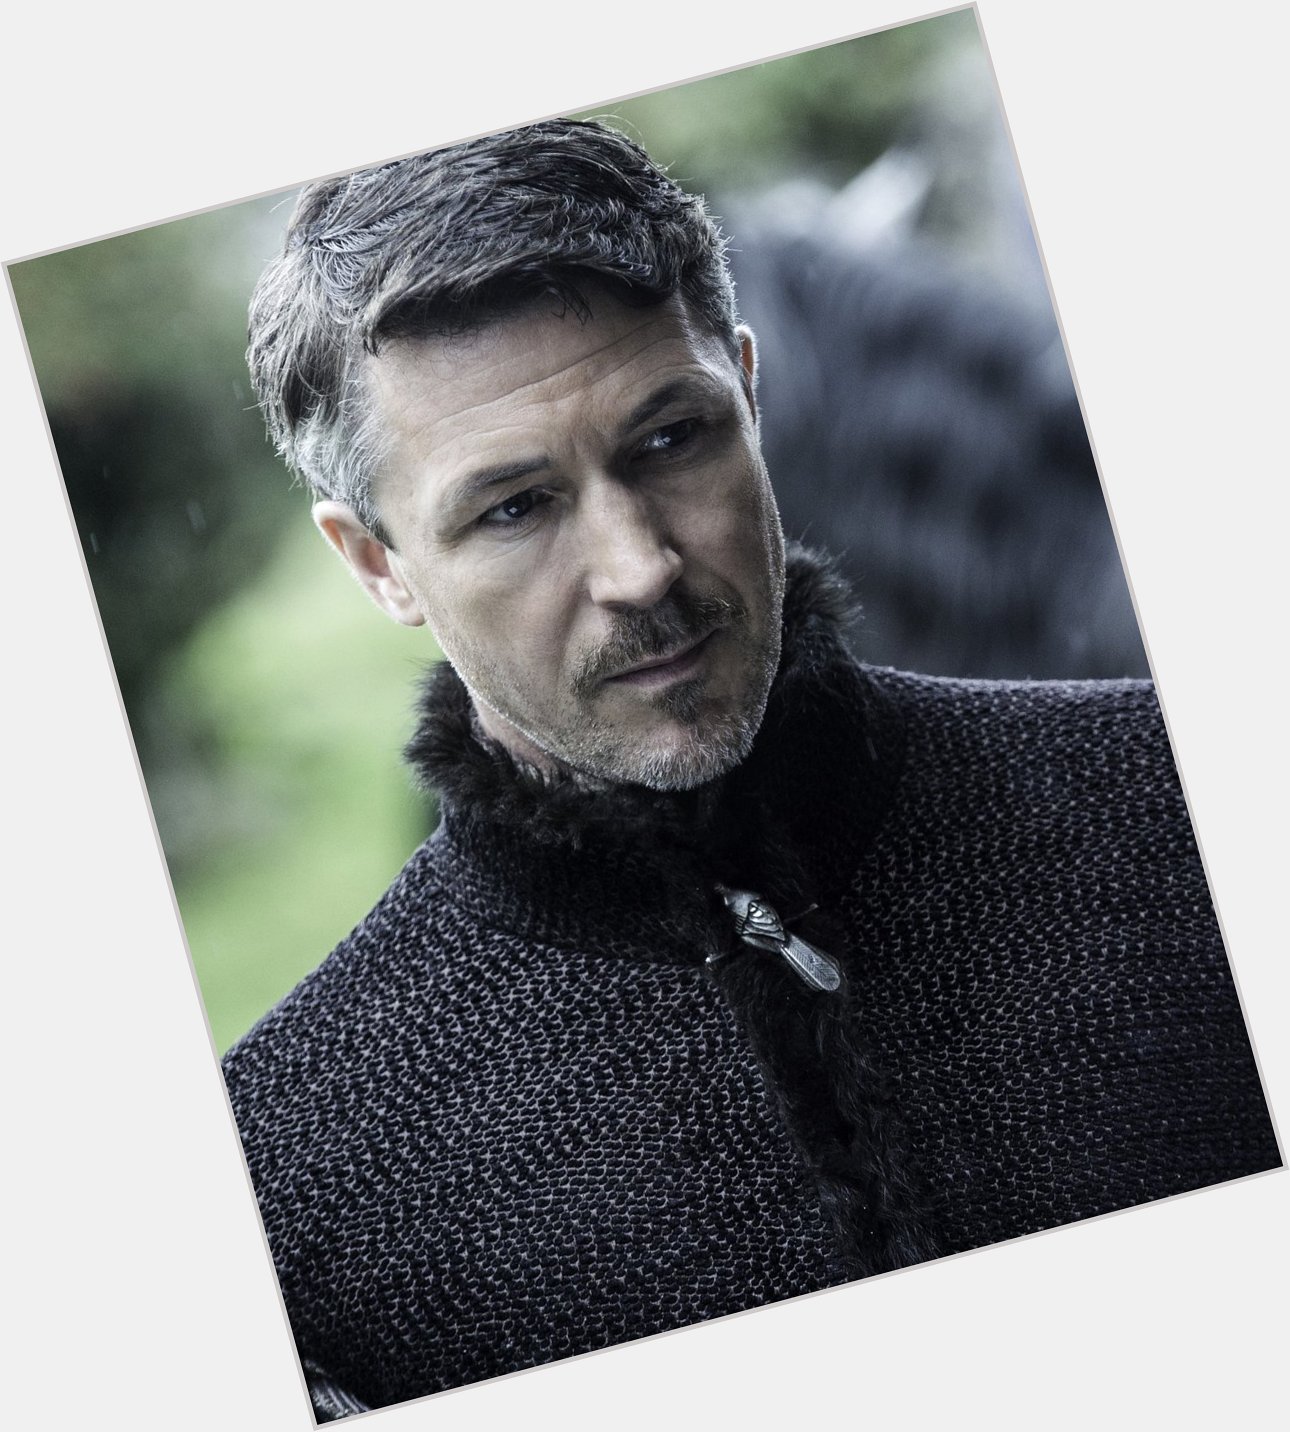 Happy Birthday to Aidan Gillen! 

Do you recognize him from anything that you ve watched? 